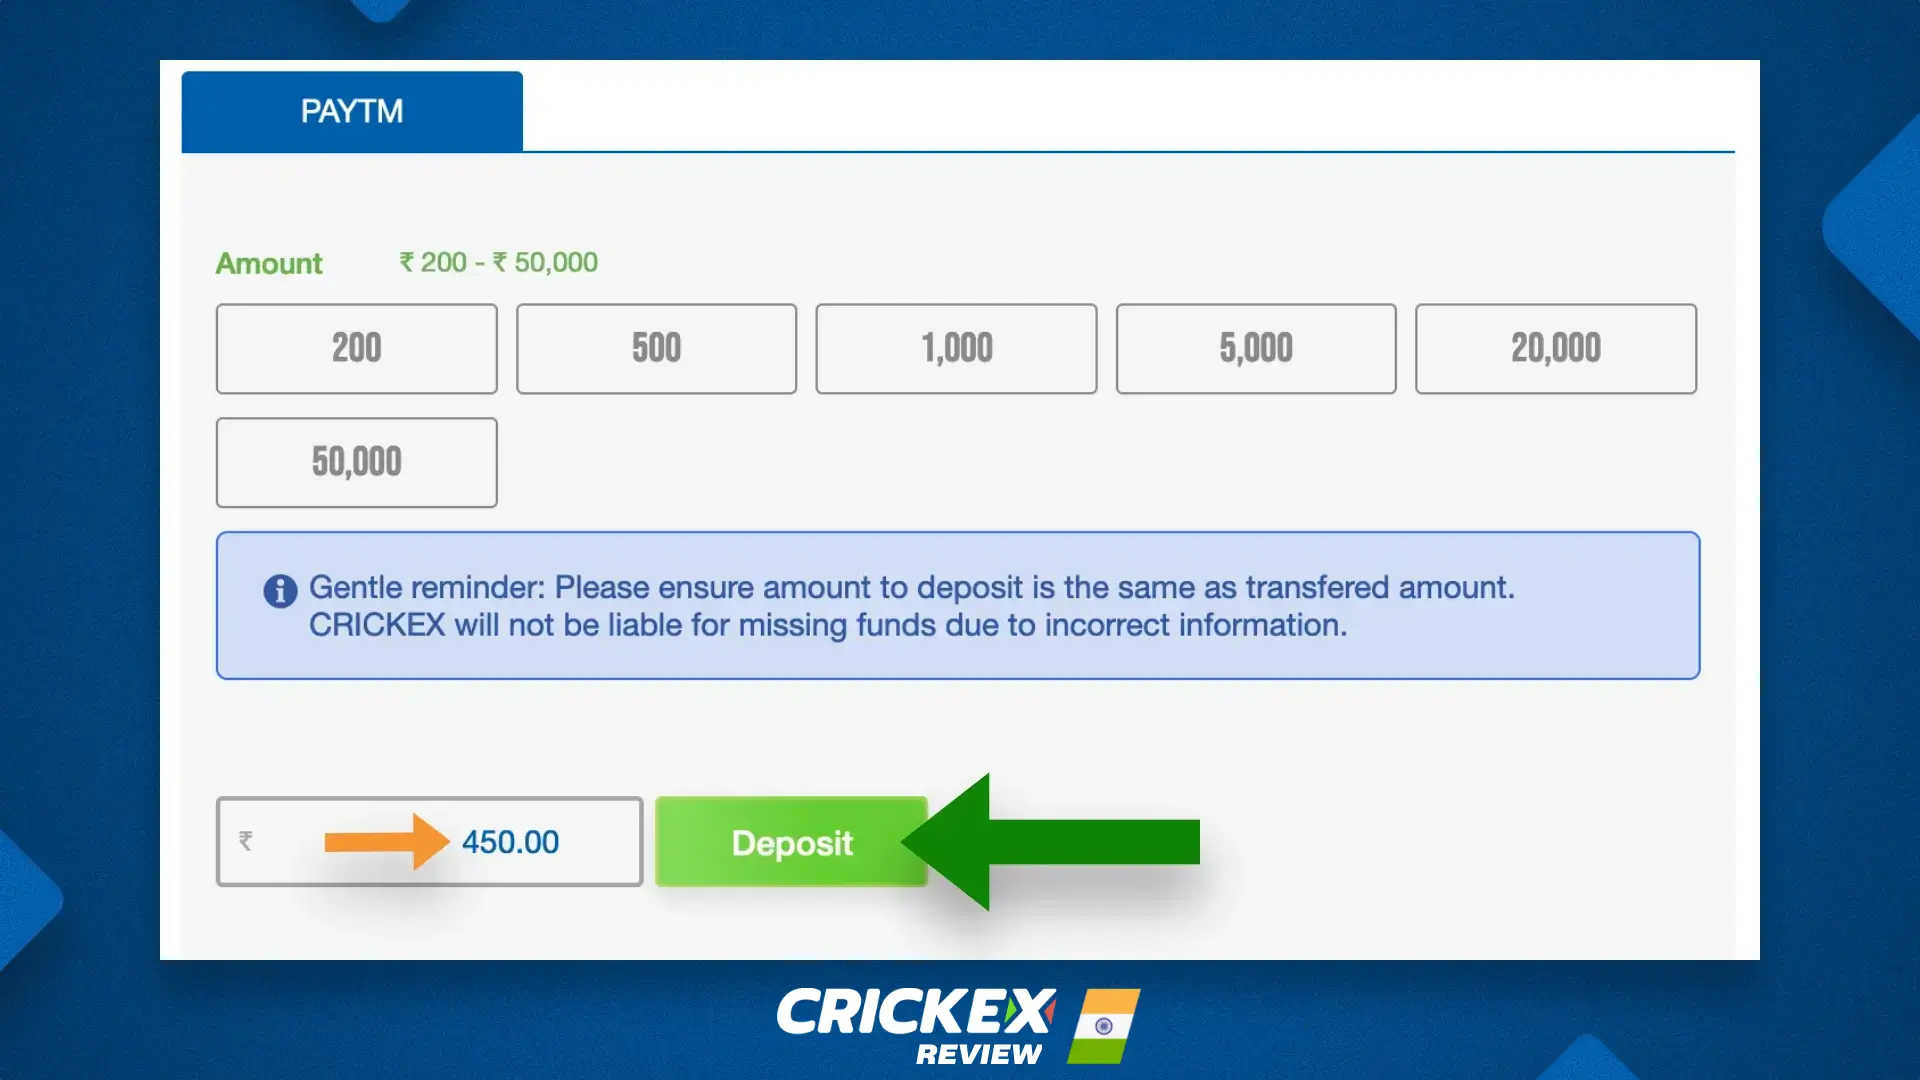 Deposit amount and proof of payment at Crickex platform